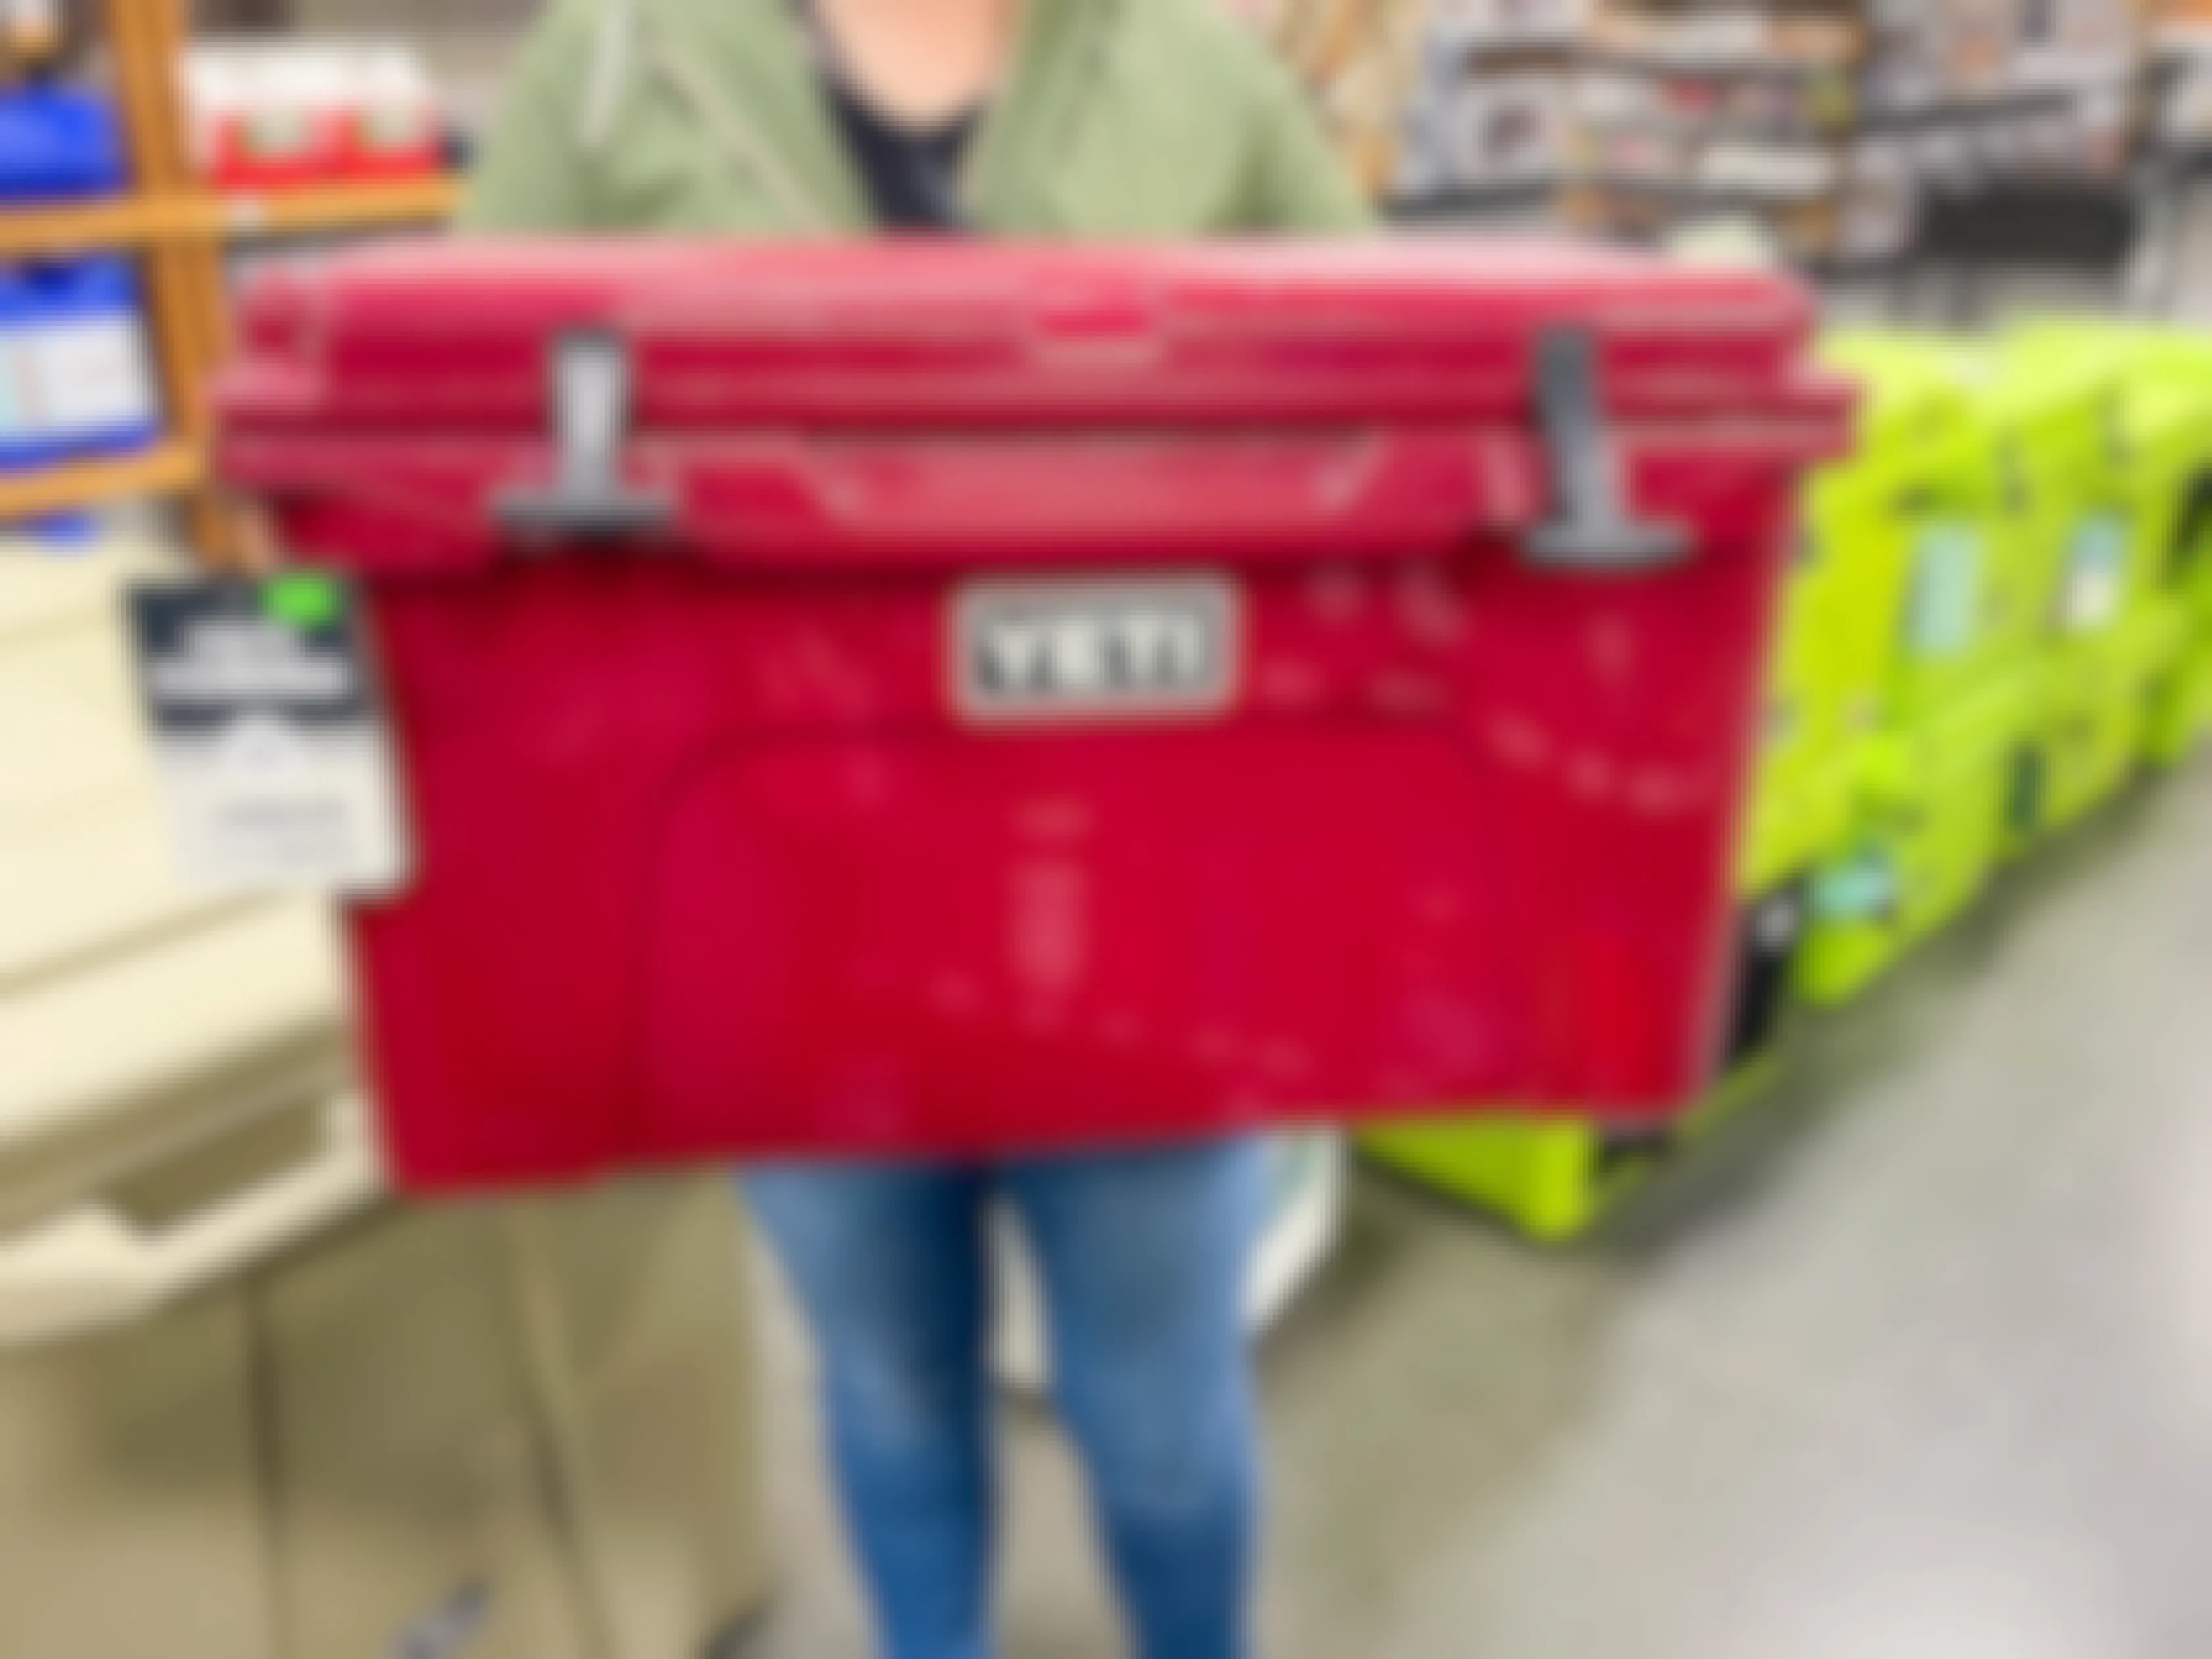 Person holding a large YETI cooler inside a store.